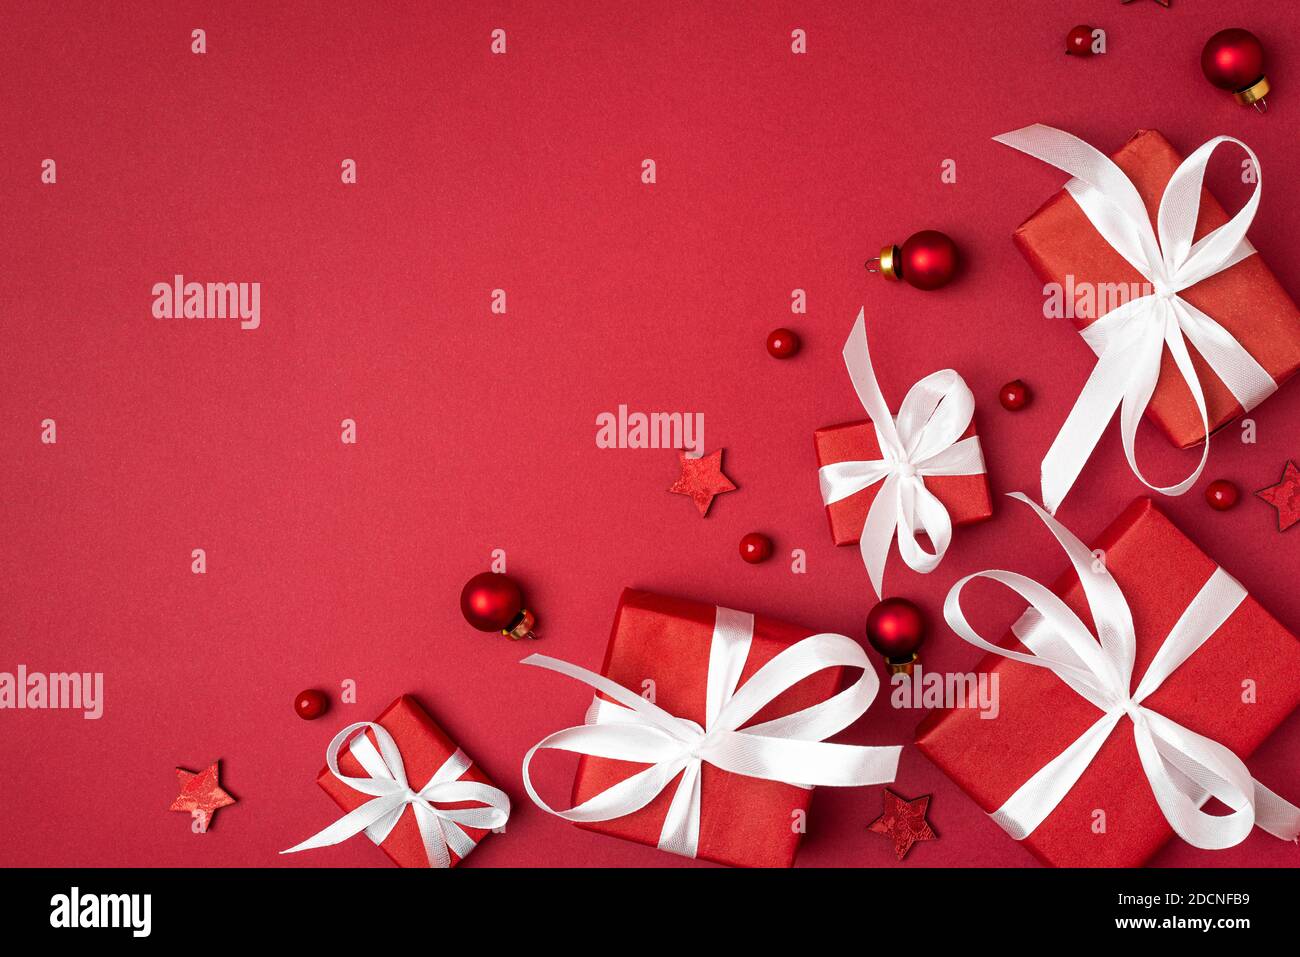 Christmas red gifts with white ribbon on red background. top view. flat lay. Happy winter holidays. Merry Christmas and Happy New Year greeting card Stock Photo